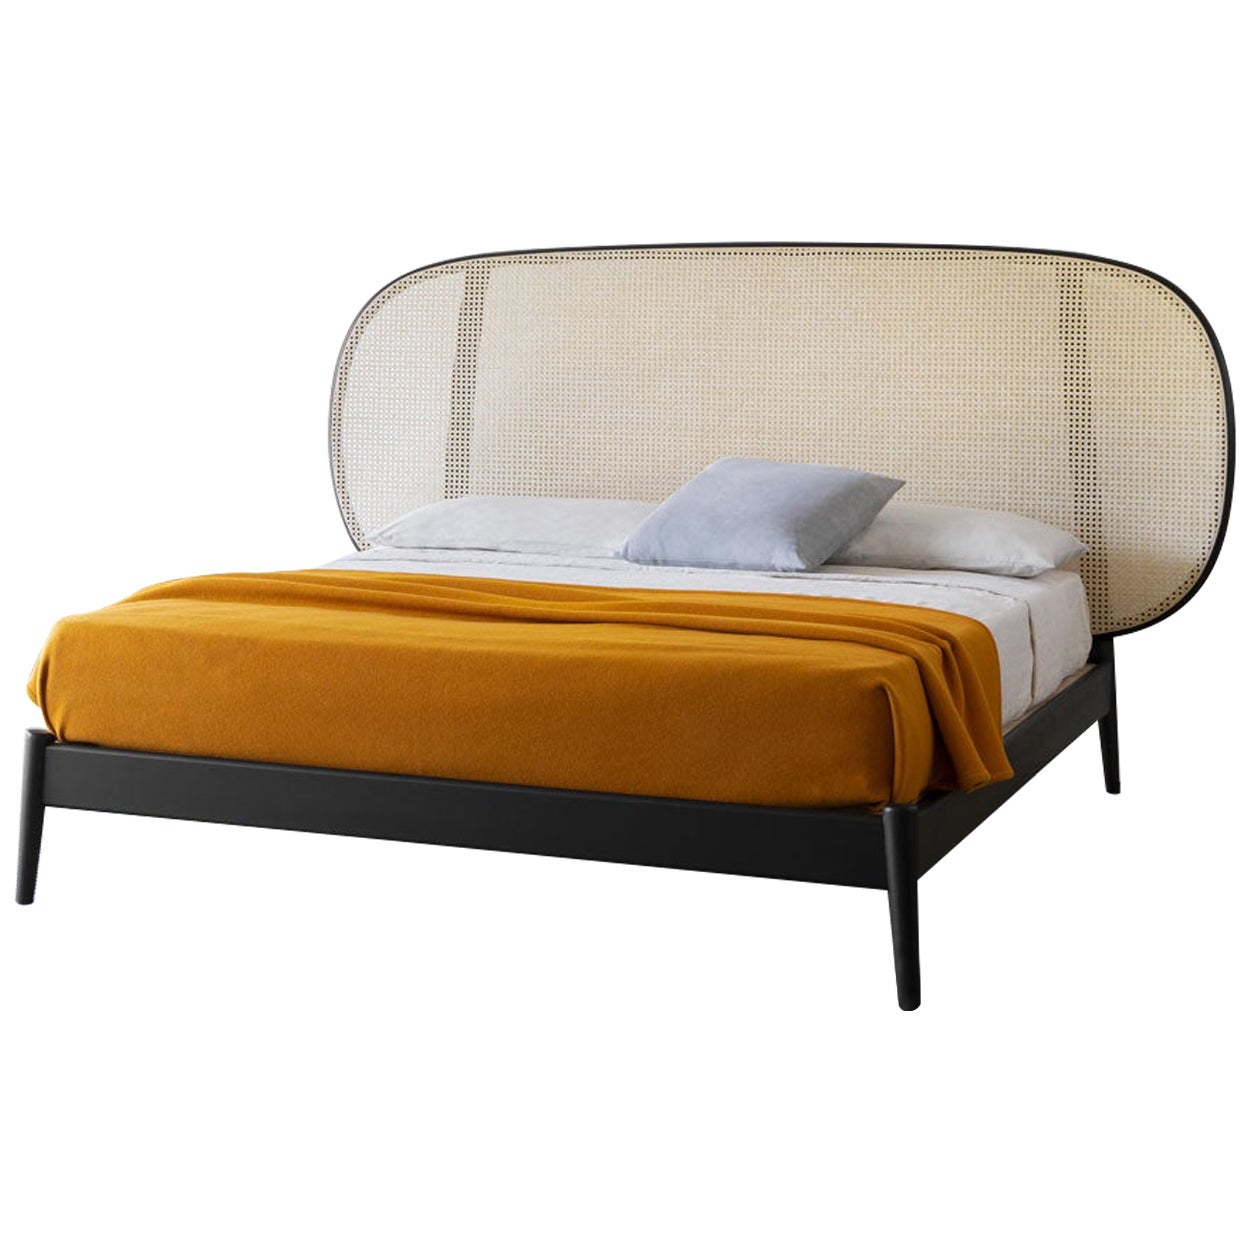 Shiko Wien King Size Bed by E-GGS For Sale